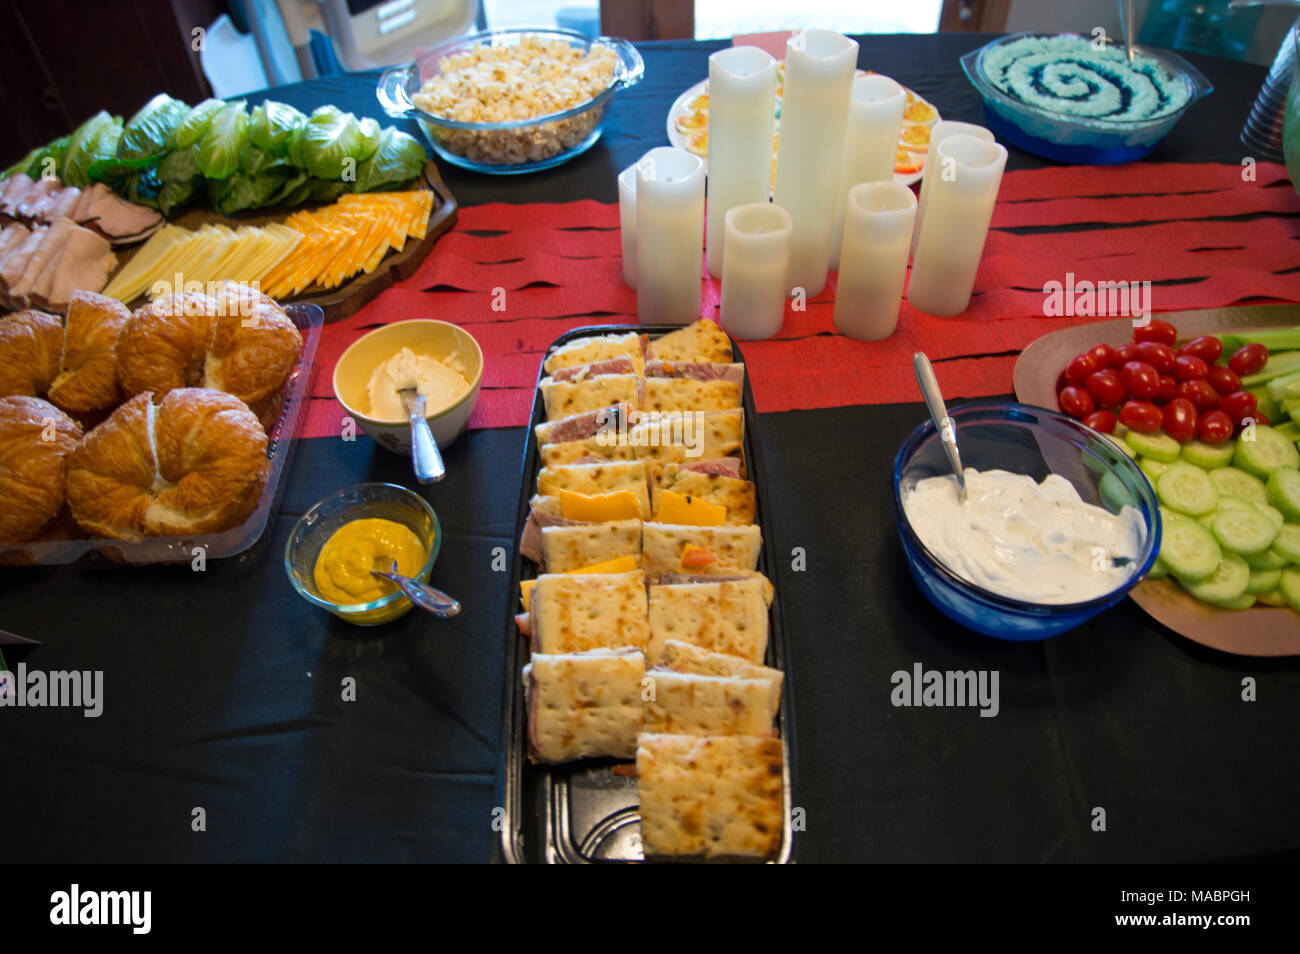 Food set out for a party. Stock Photo